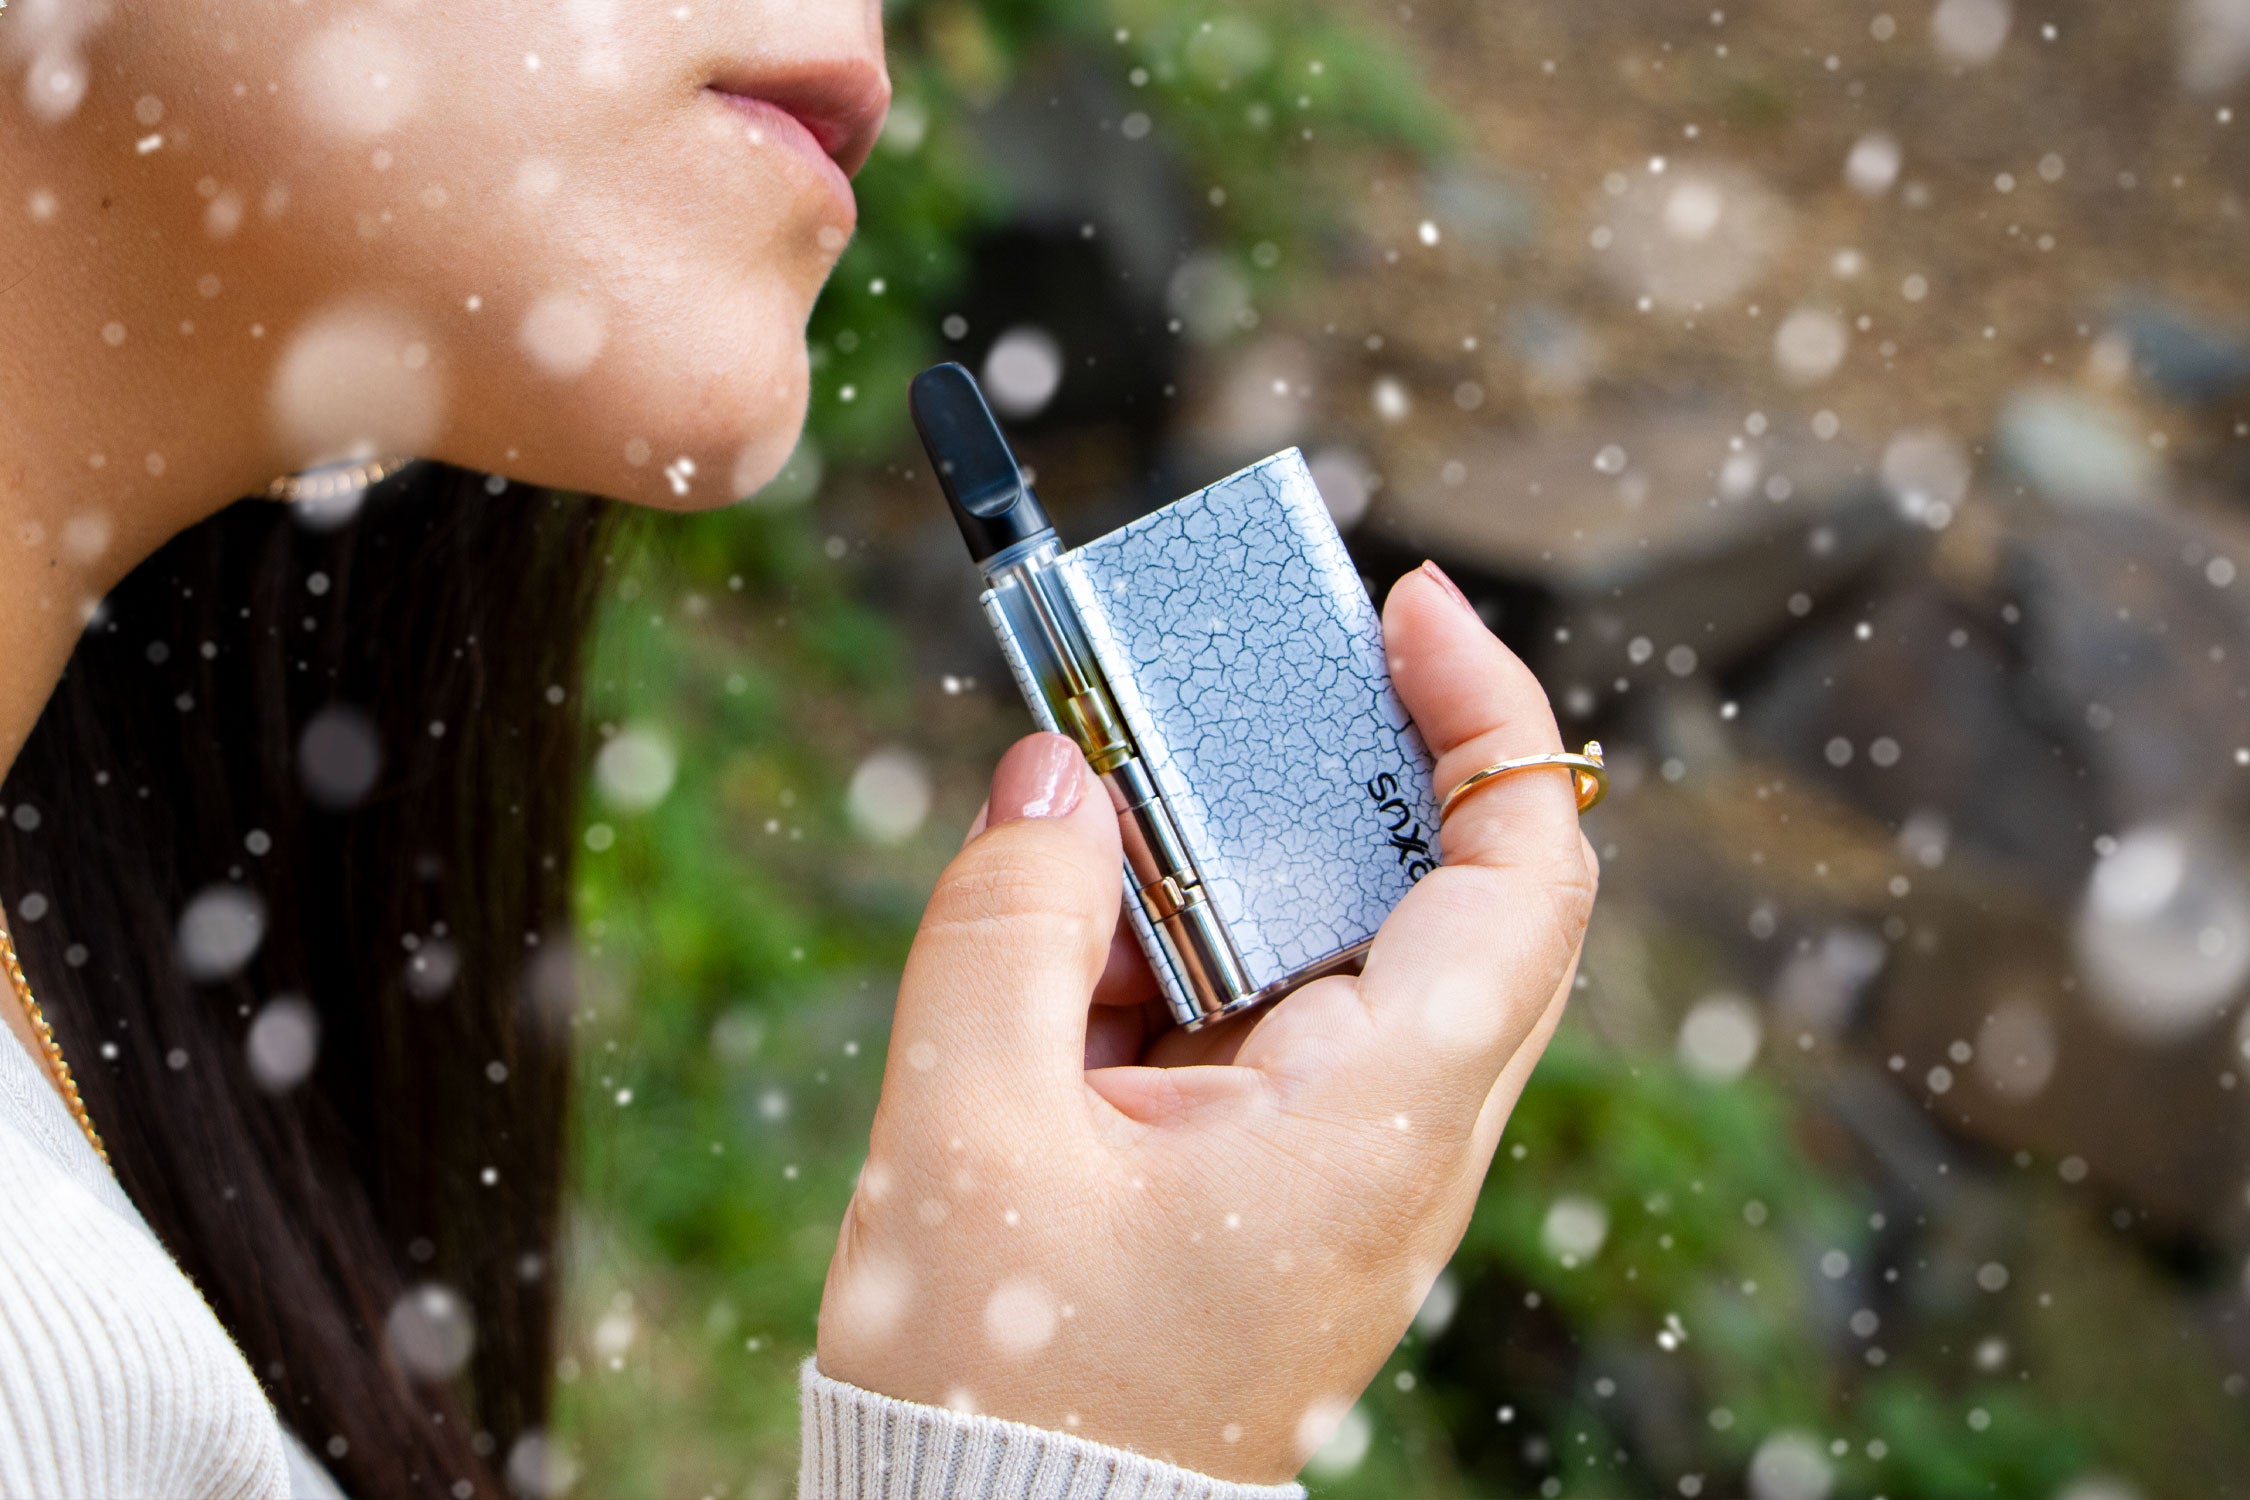 Woman holding Exxus Palm Pro Crackle in front of grassy trail with snow falling